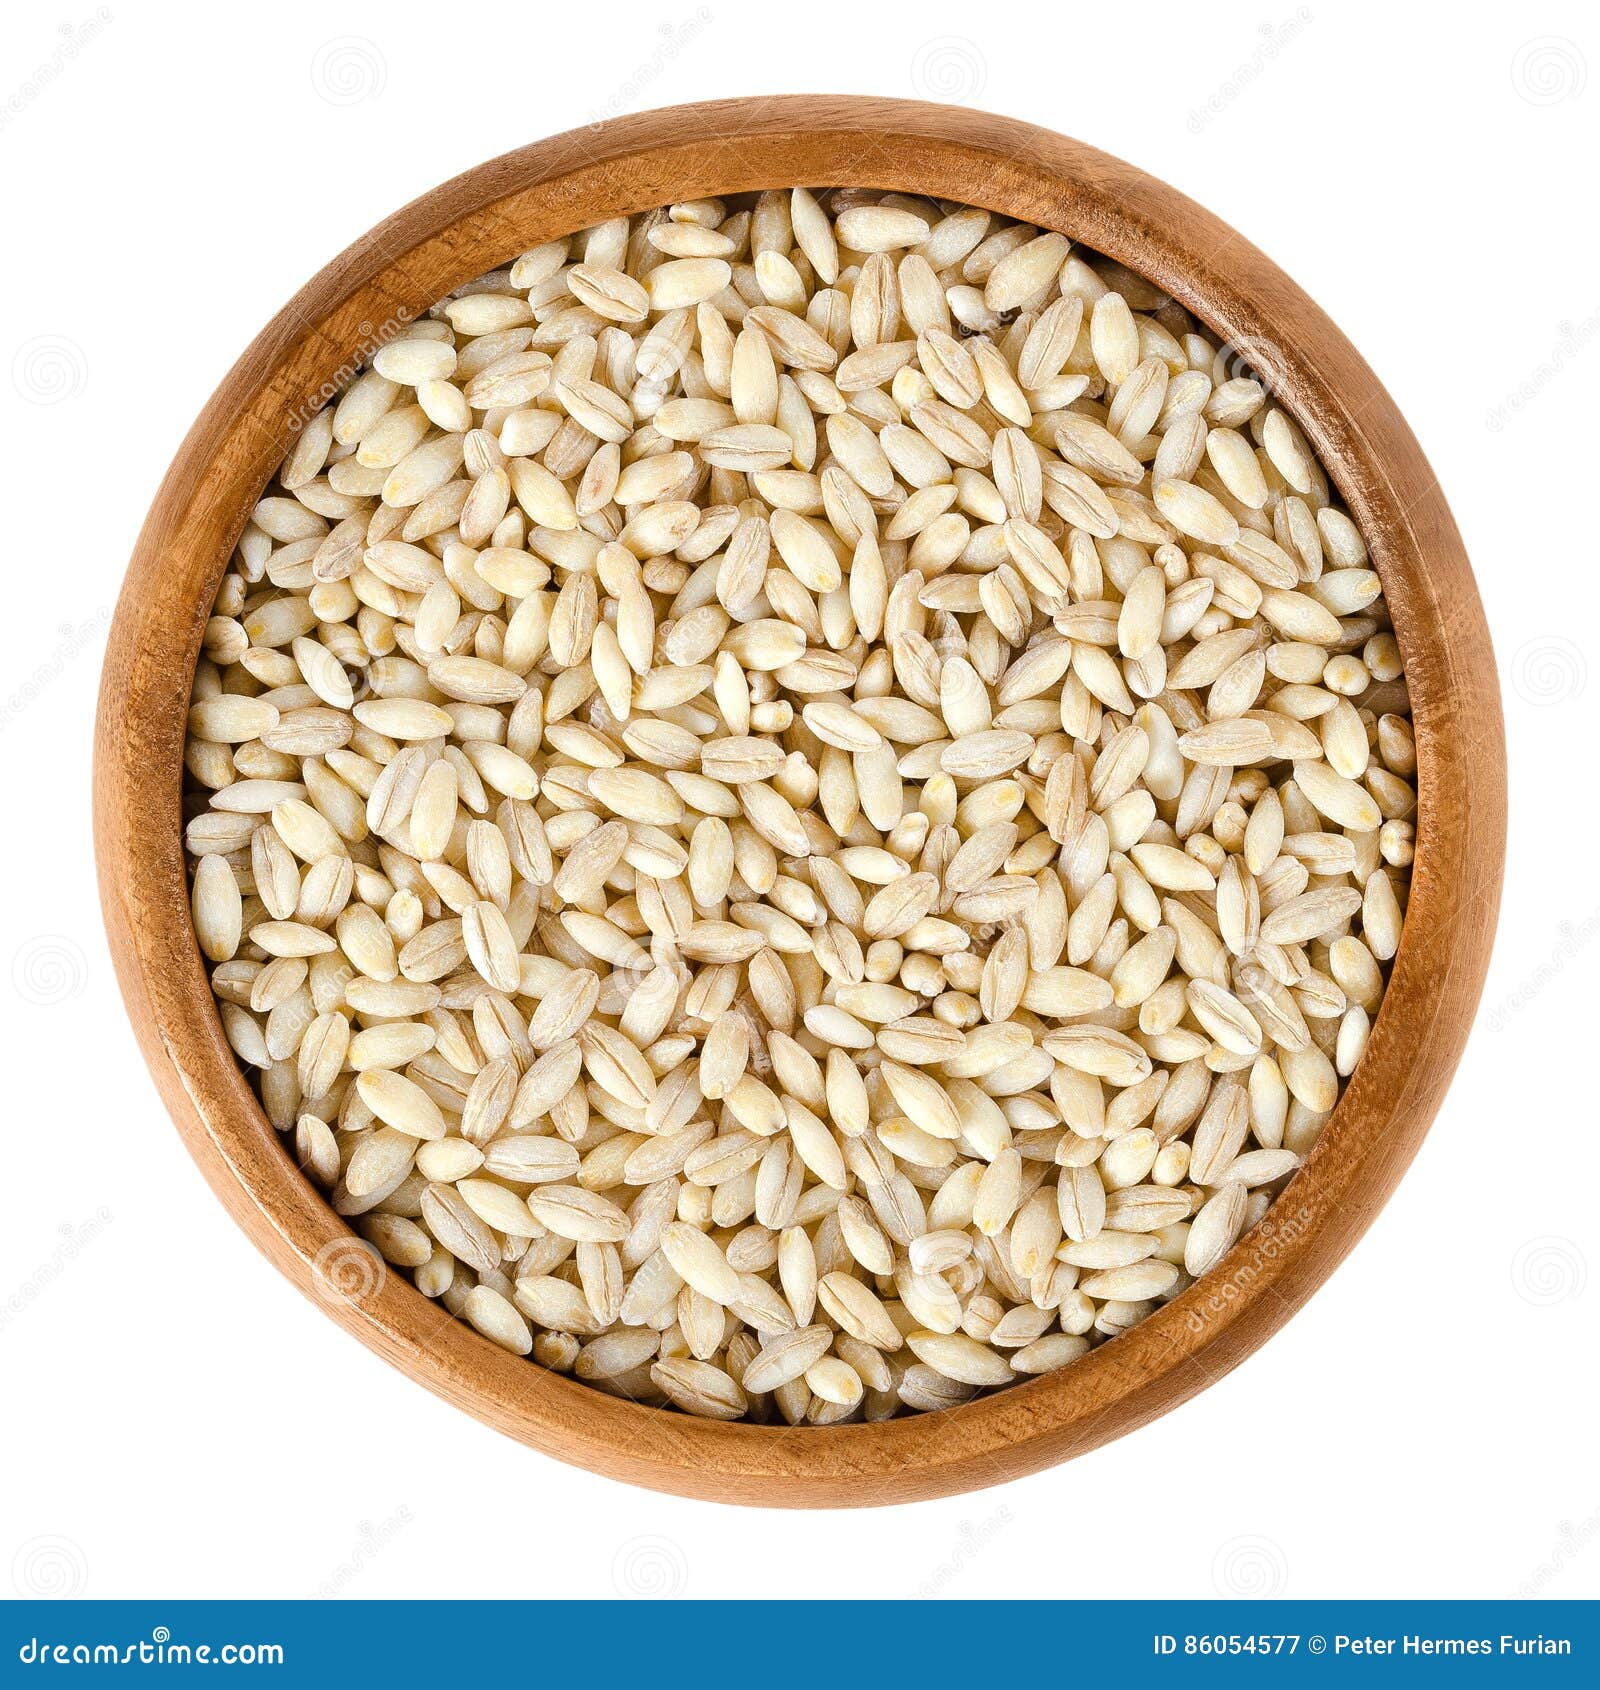 processed pearl barley in wooden bowl over white